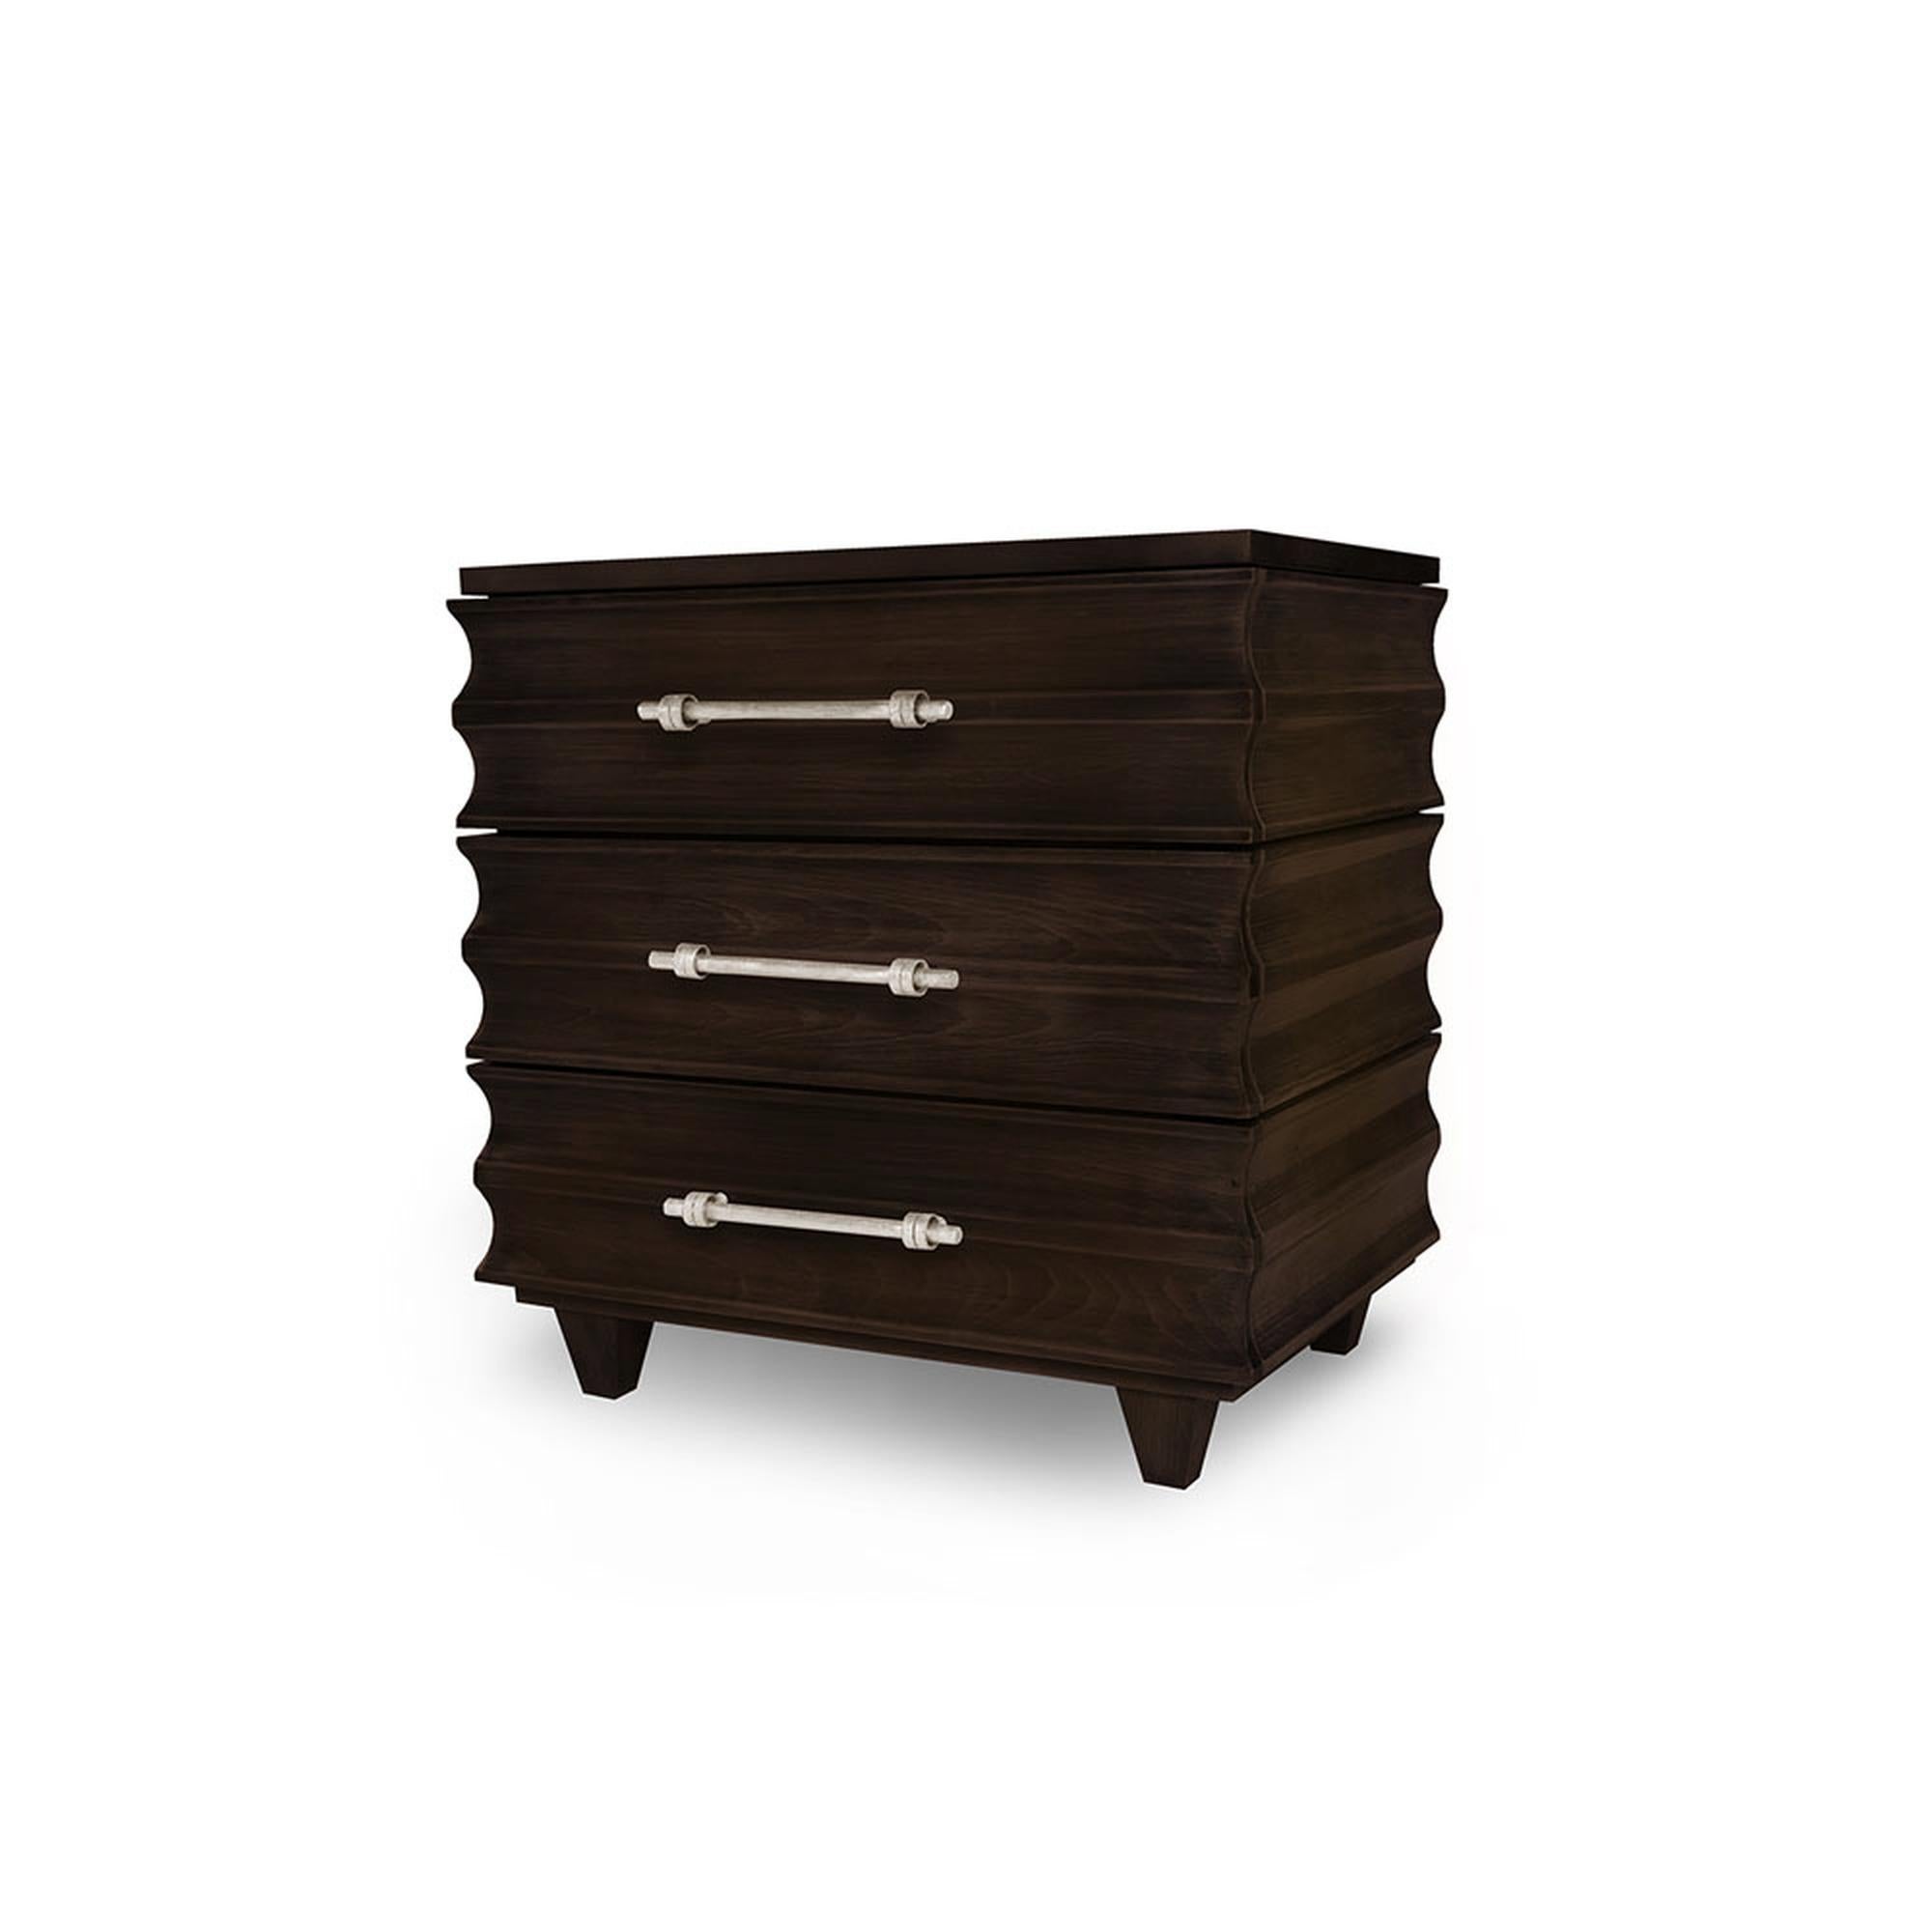 Design, detail, and style are synonymous with the carved to perfection Crawford nightstand. Made of solid wood, the drawers are scalloped and feature three softclose drawers, hand-gilded antique silver metal pulls, and a mirrored top. There’s